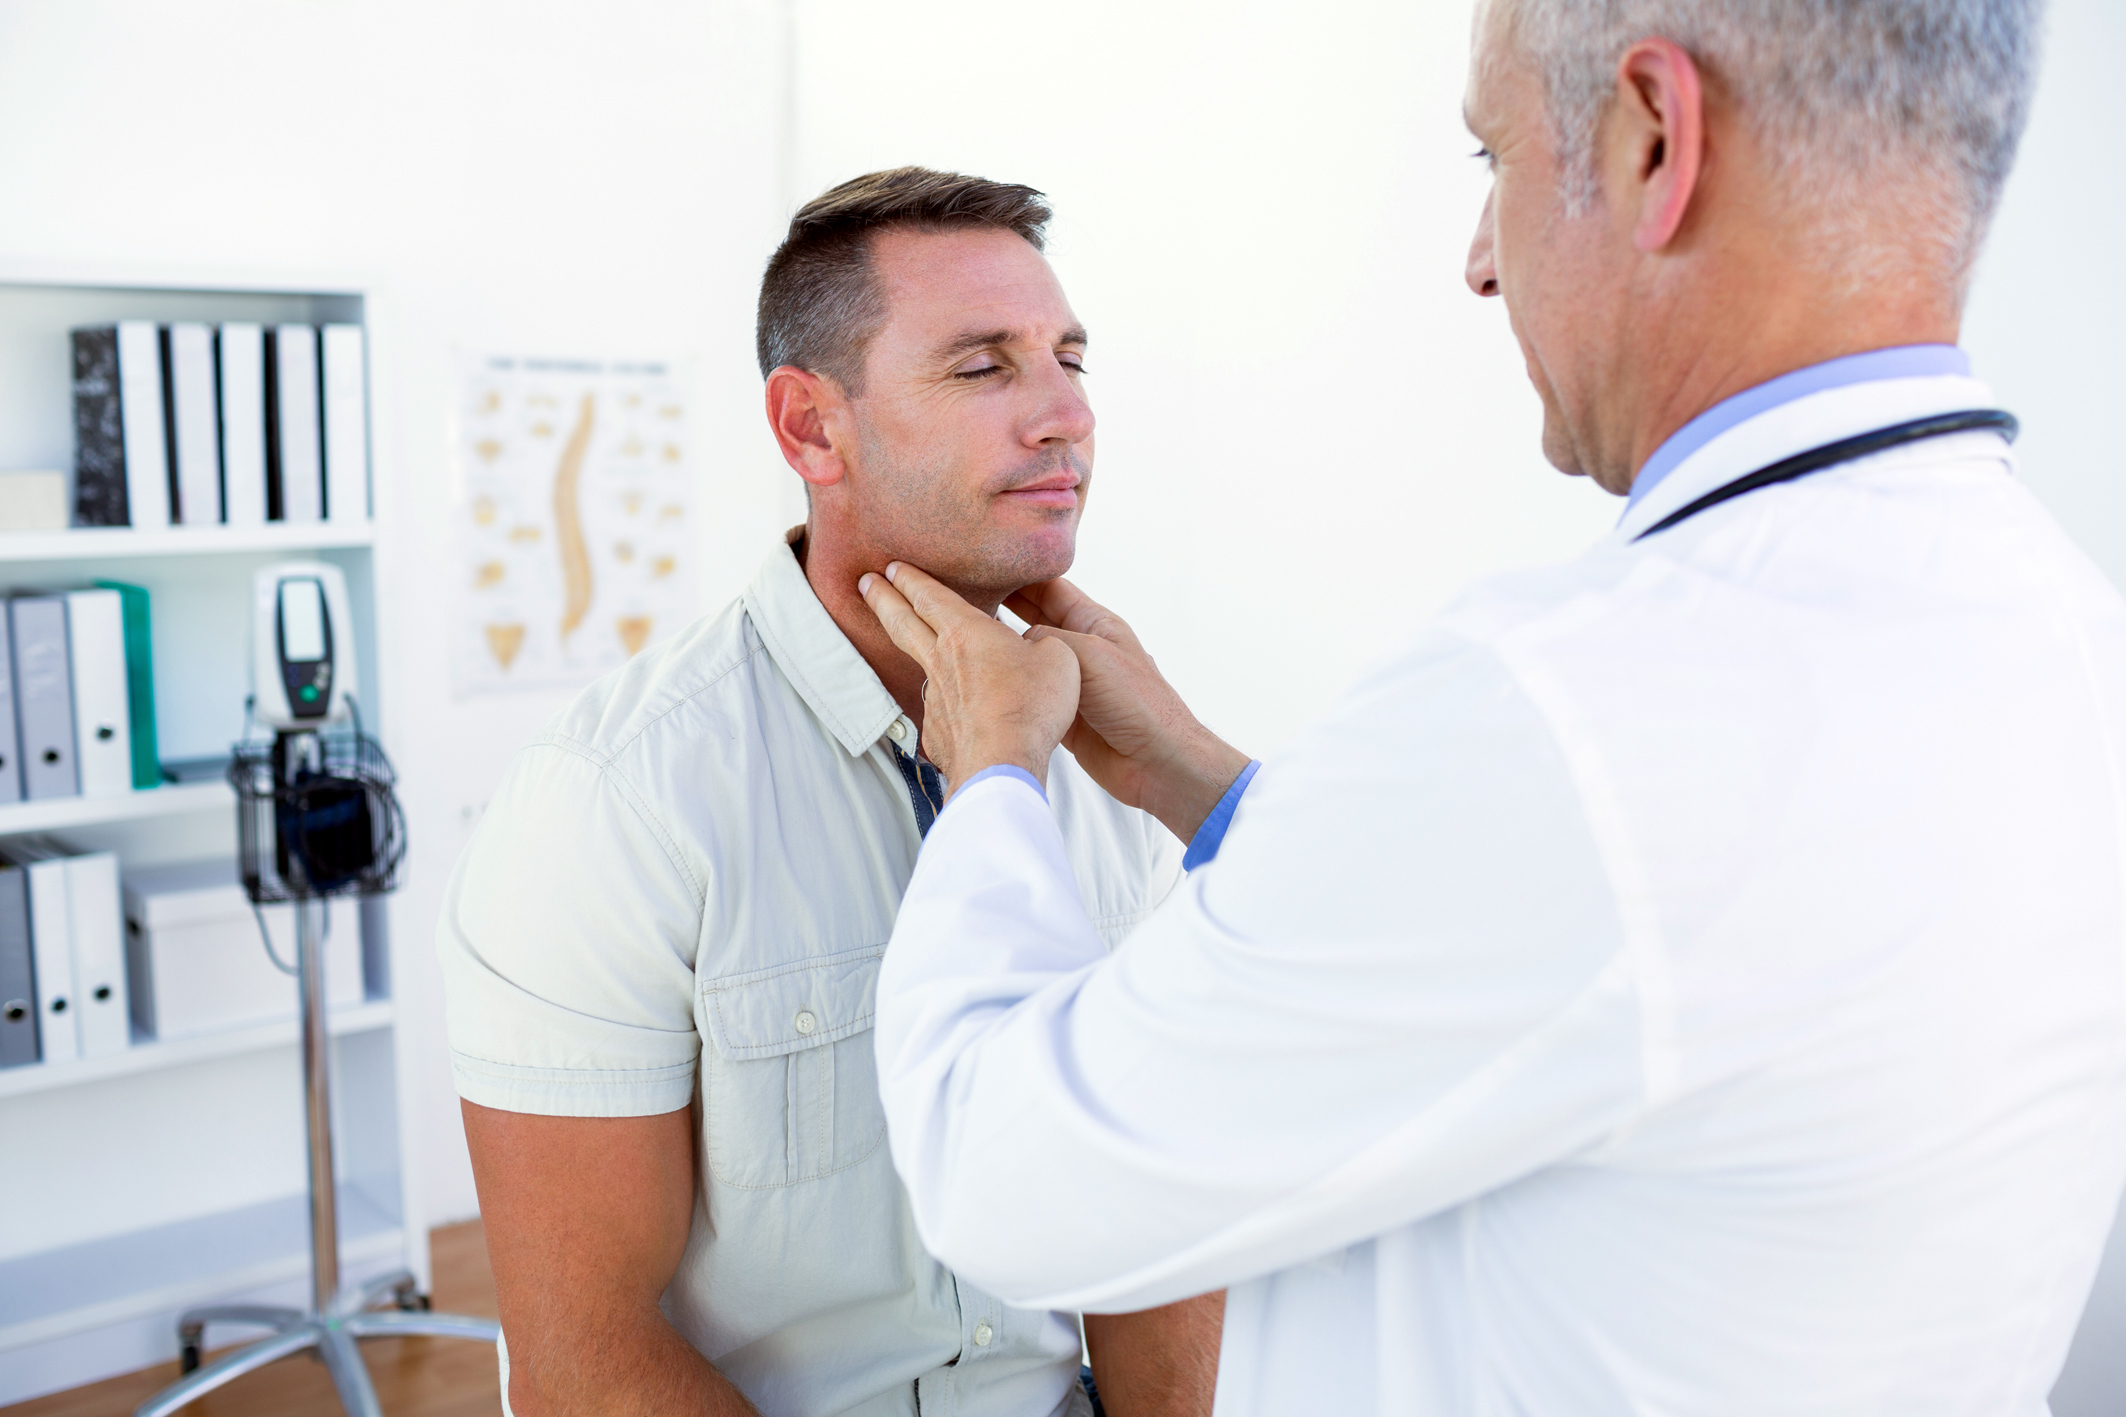 Male Physical Exam